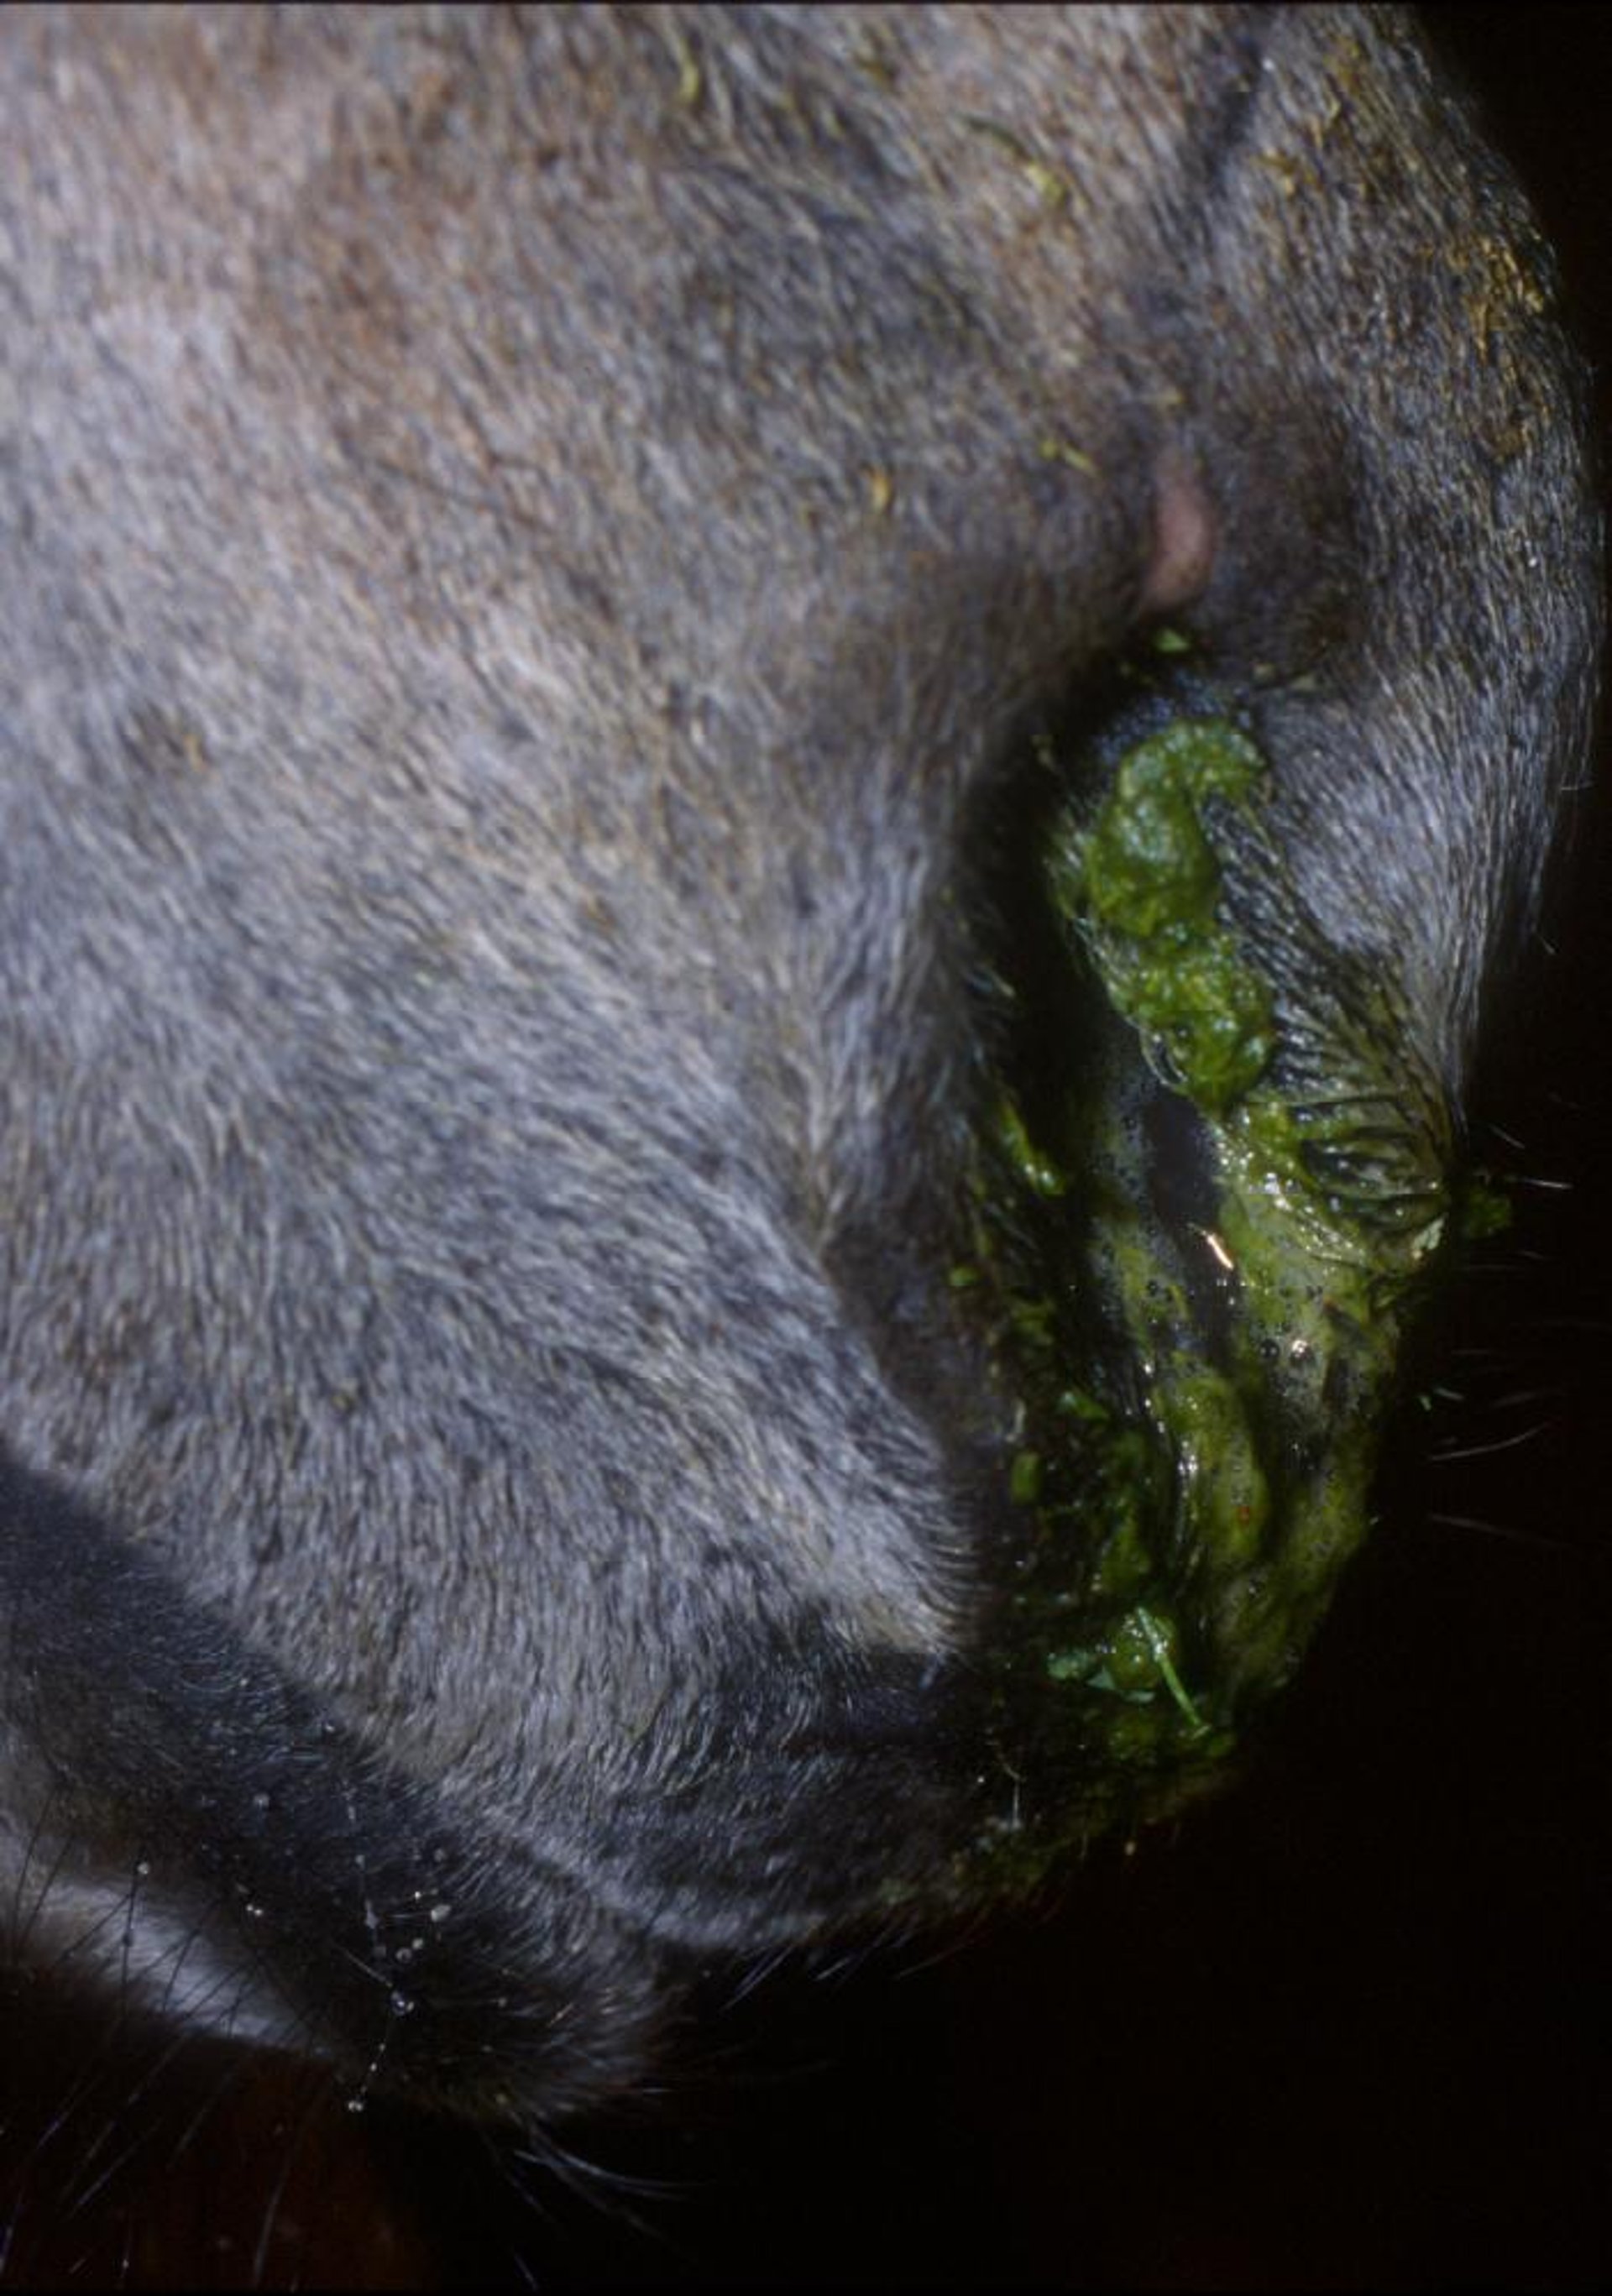 Esophageal obstruction, feed at nares, horse